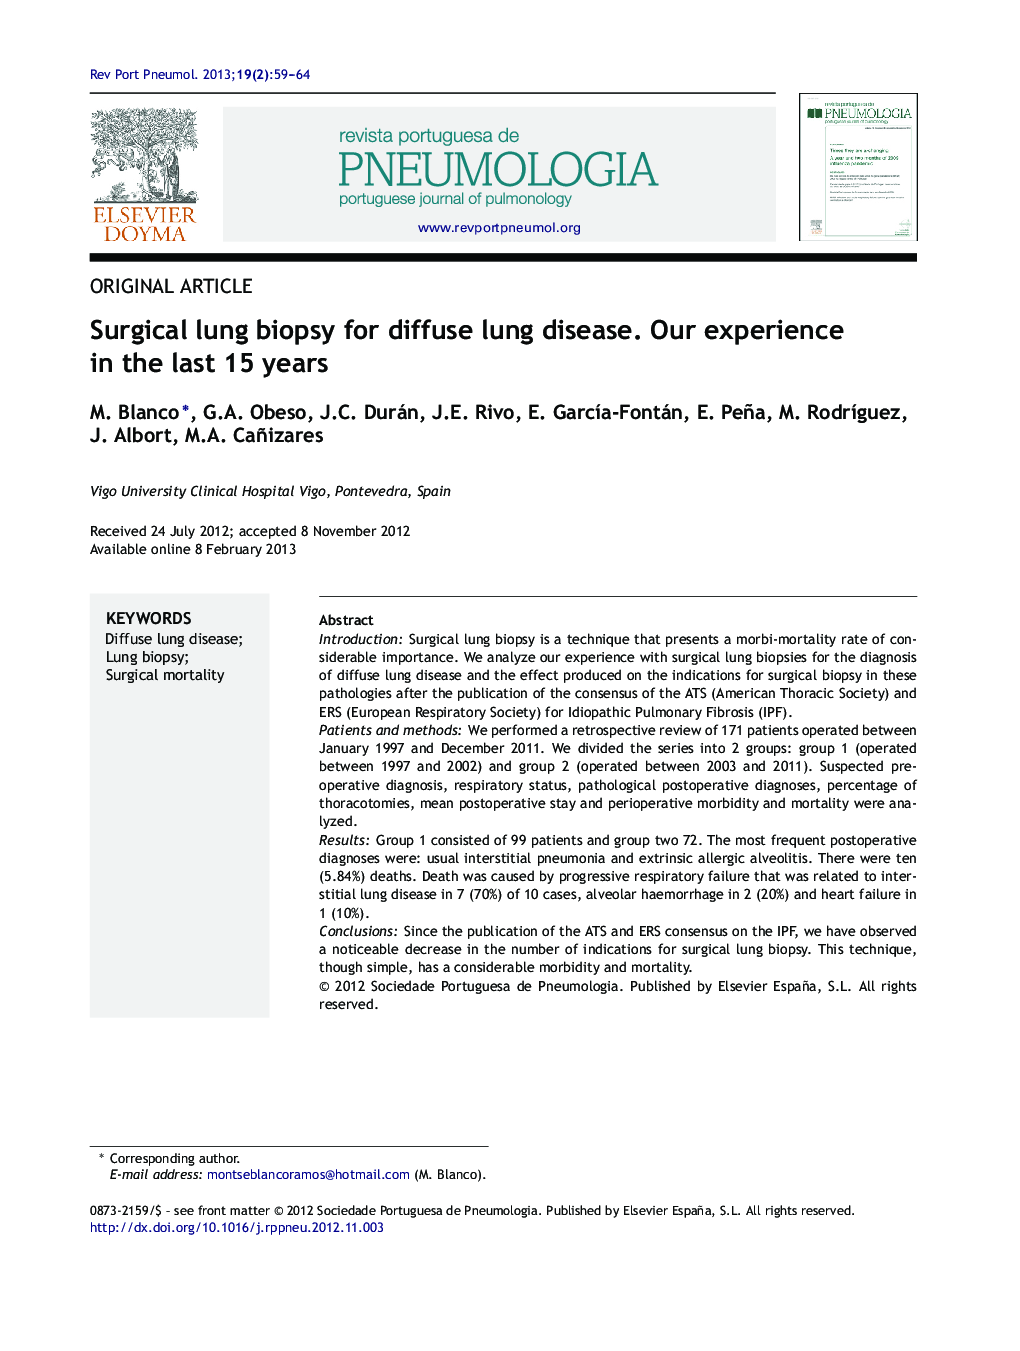 Surgical lung biopsy for diffuse lung disease. Our experience in the last 15 years